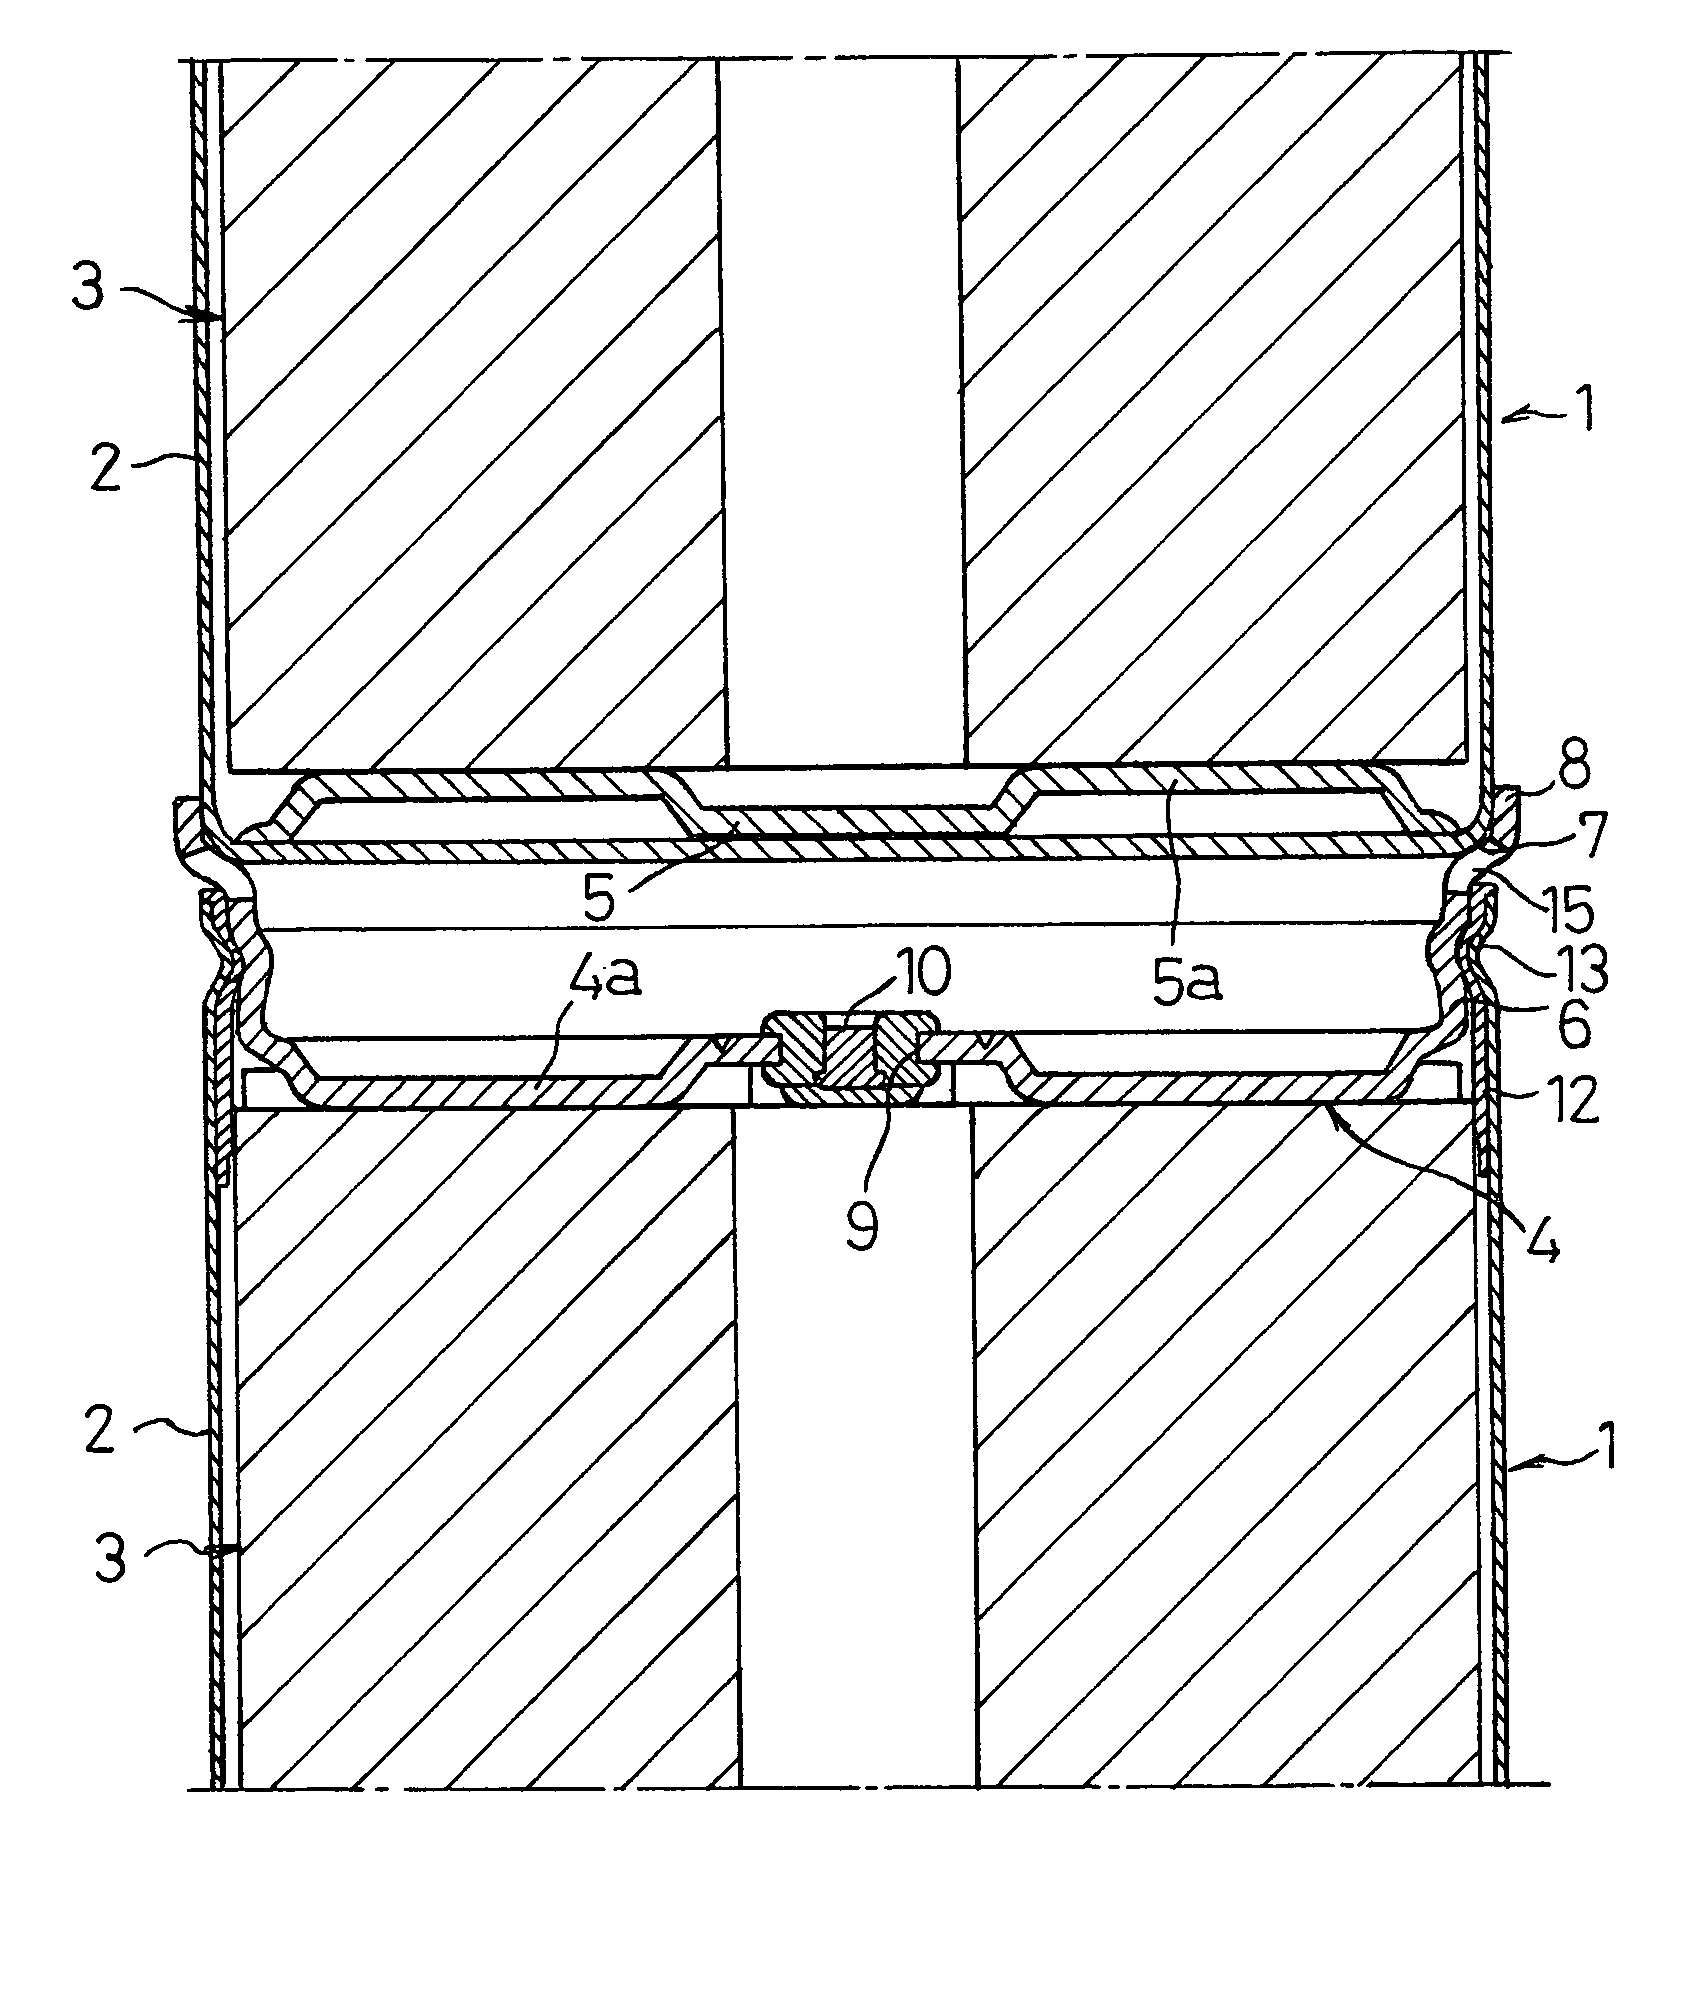 Battery and battery assembly